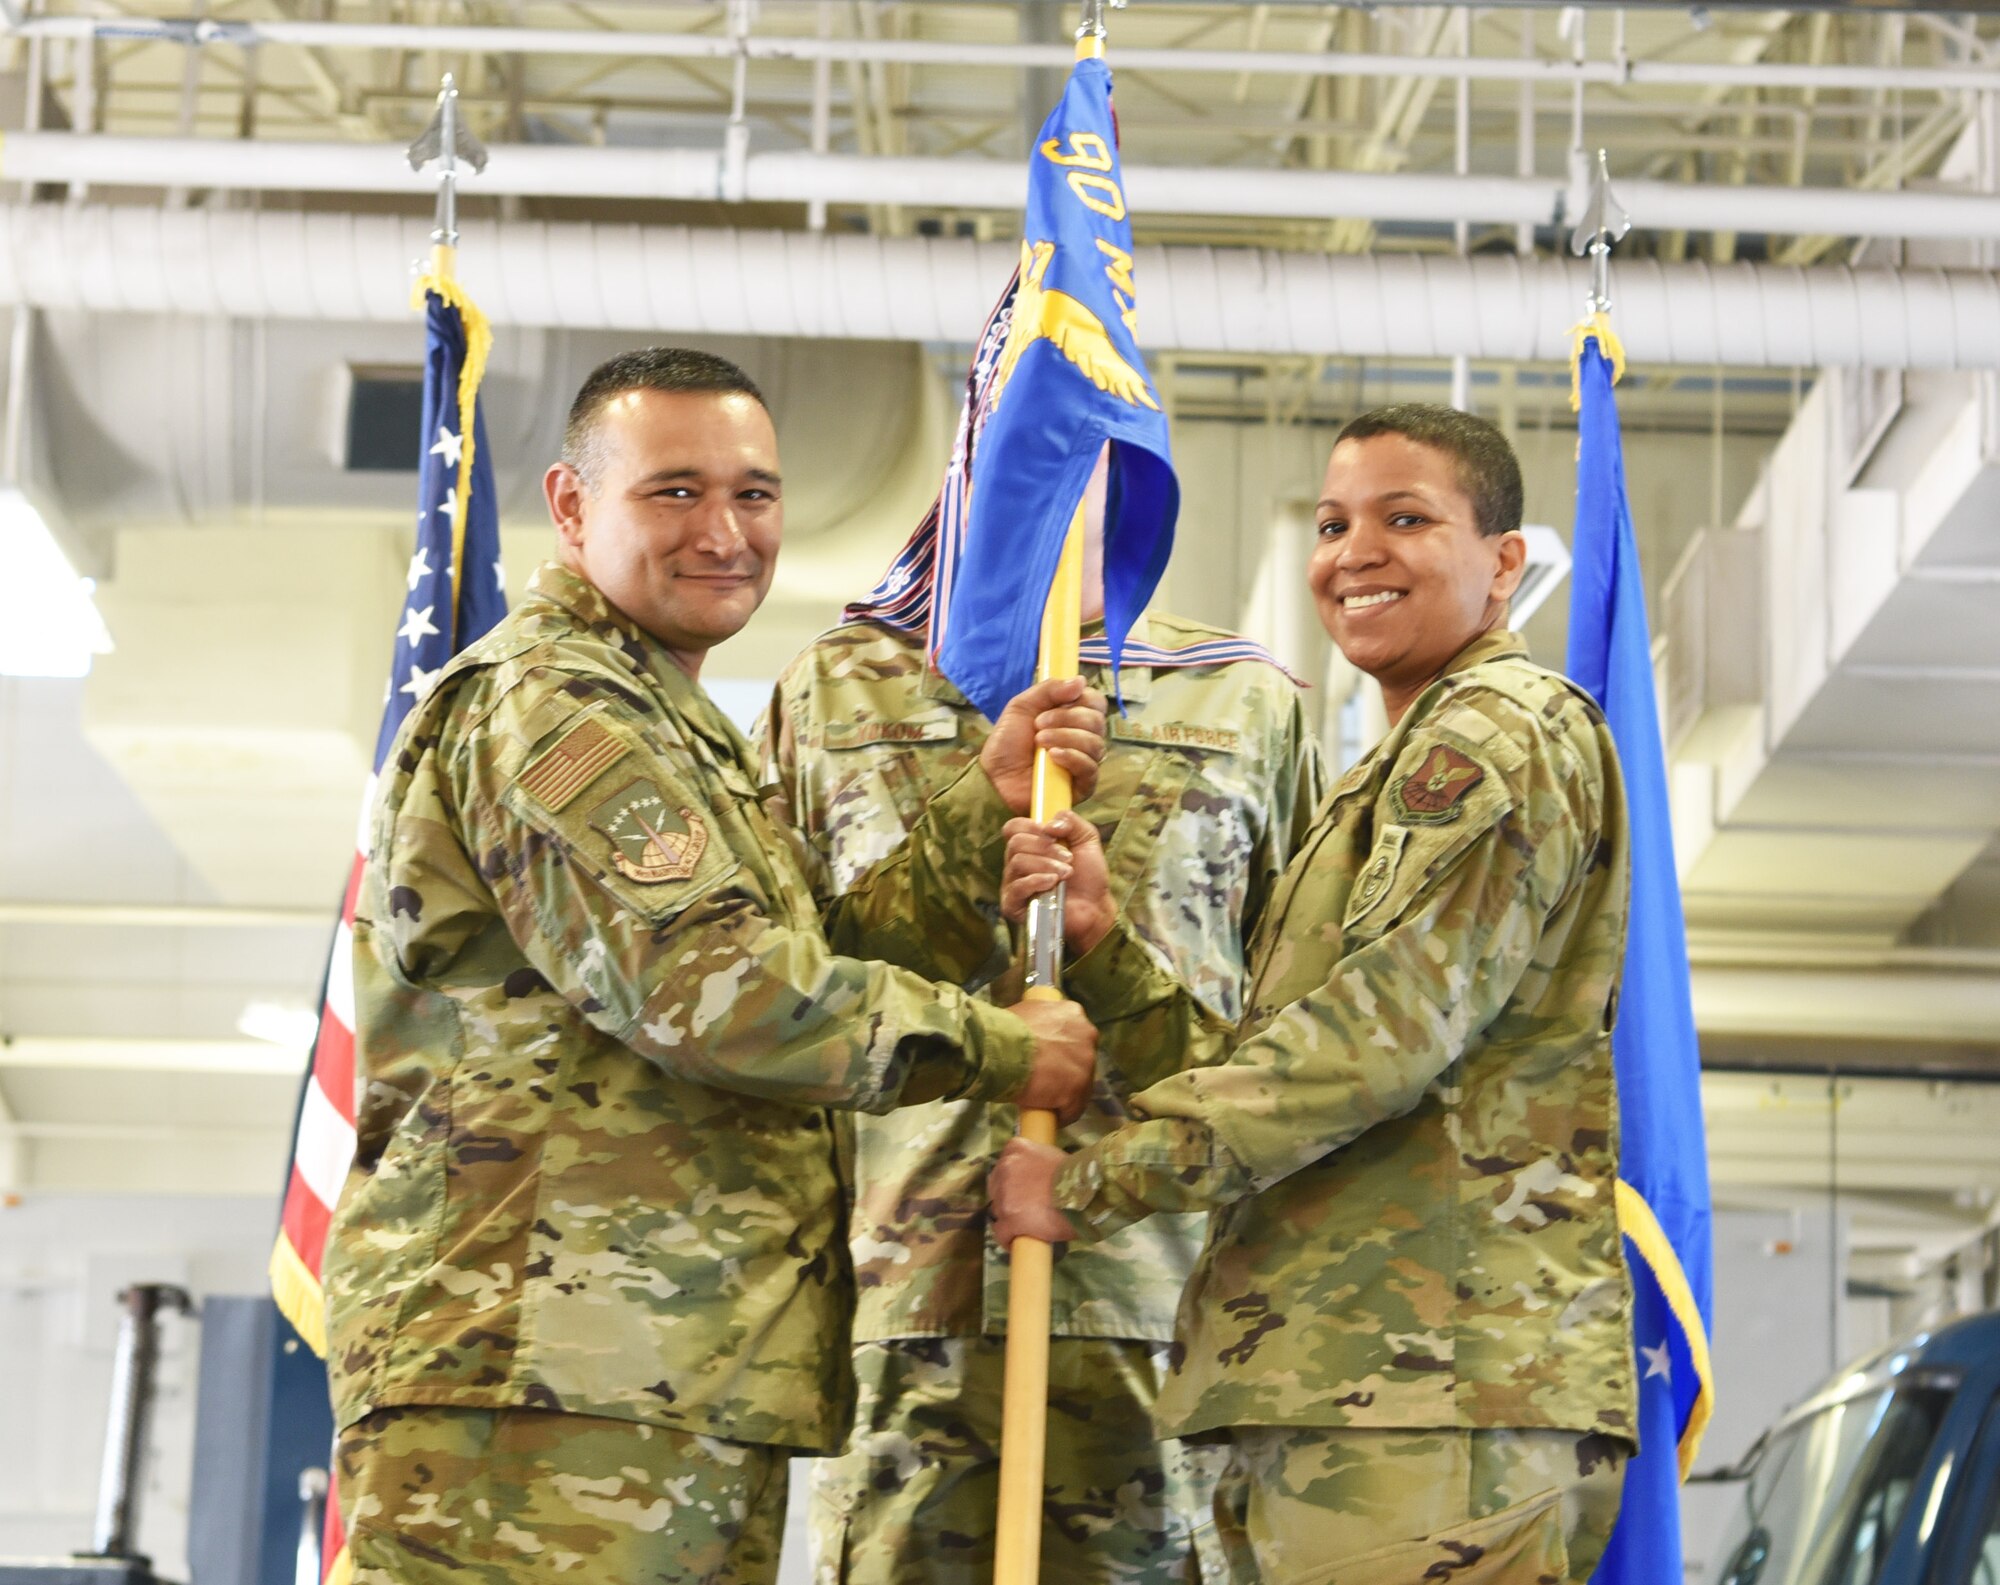 Colonel Brian Rico, 90th Maintenance Group commander, passes the guidon to Maj. Christine Hernandez, 90th Missile Maintenance Squadron incoming commander, during the 90th MMXS change of command ceremony June 28, 2019, on F.E. Warren Air Force Base, Wyo. The ceremony signified the transition of command from Lt. Col. Stephanie Wilson to Hernandez. (U.S. Air Force photo by 2nd Lt. Emily Seaton)